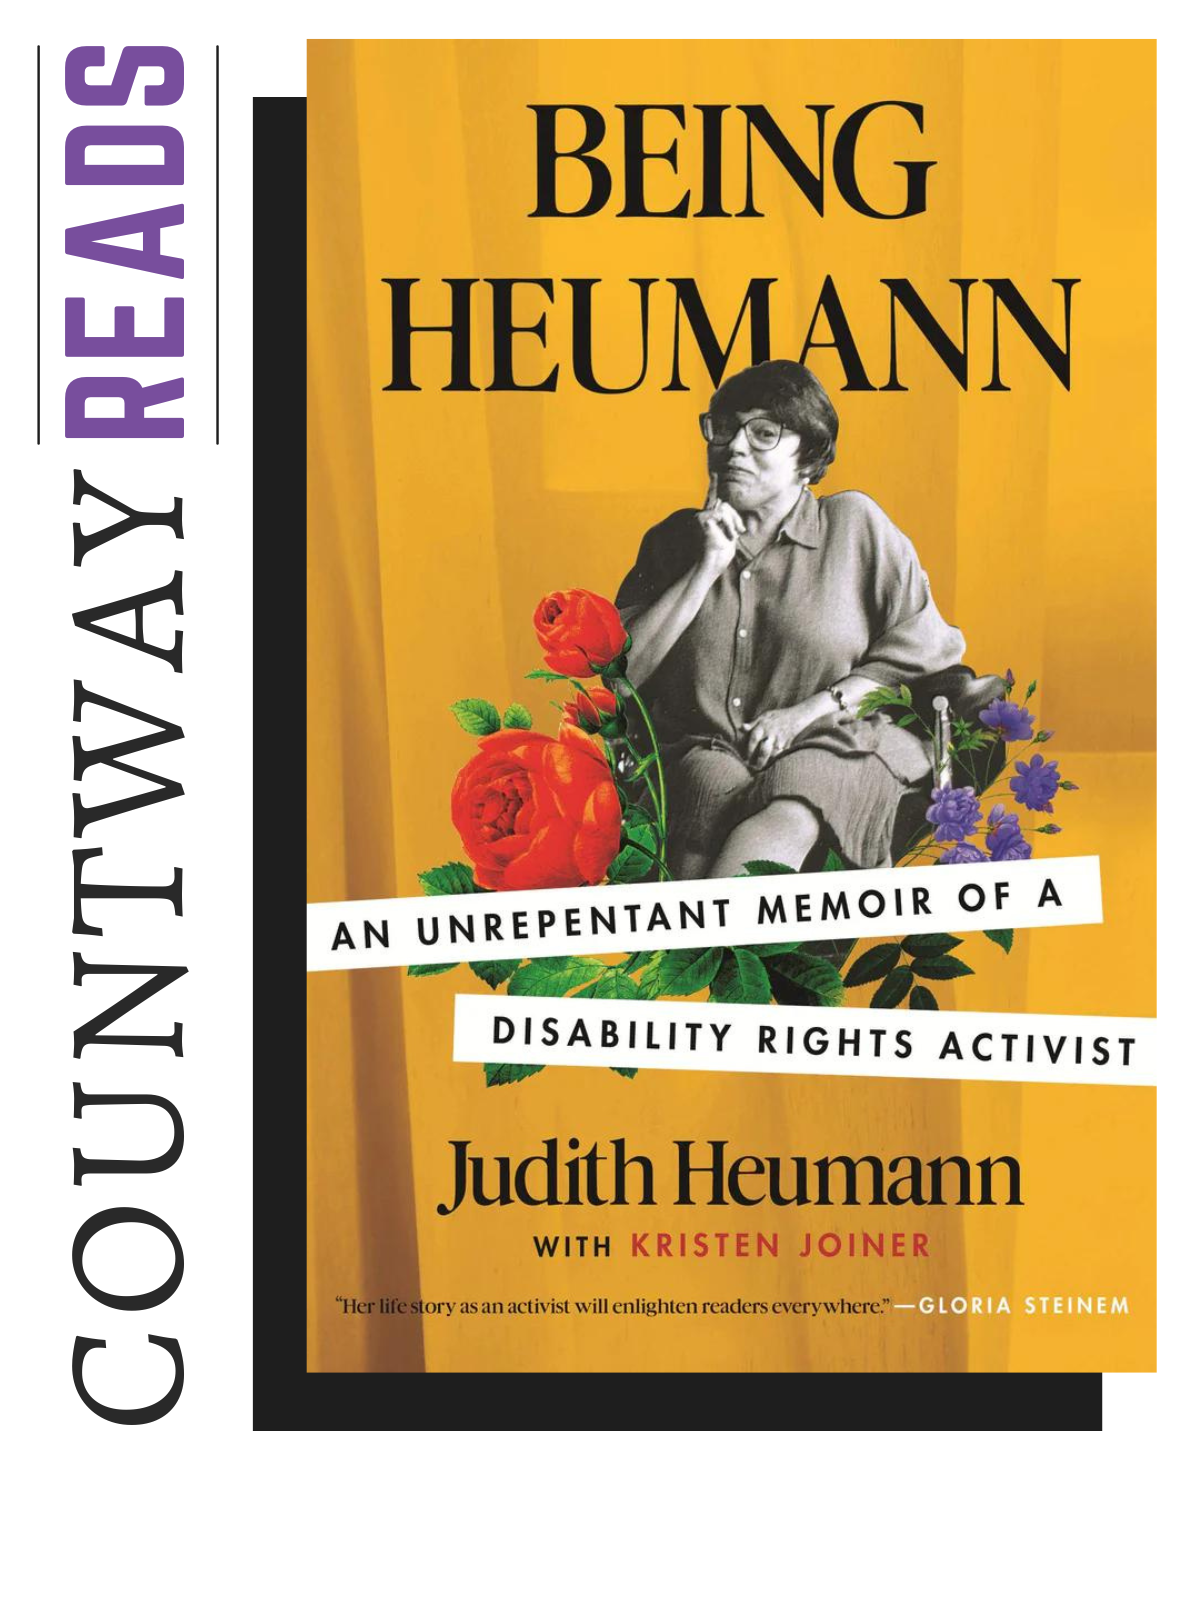 Countway Reads next to the book Being Heumann by Judith Heuman